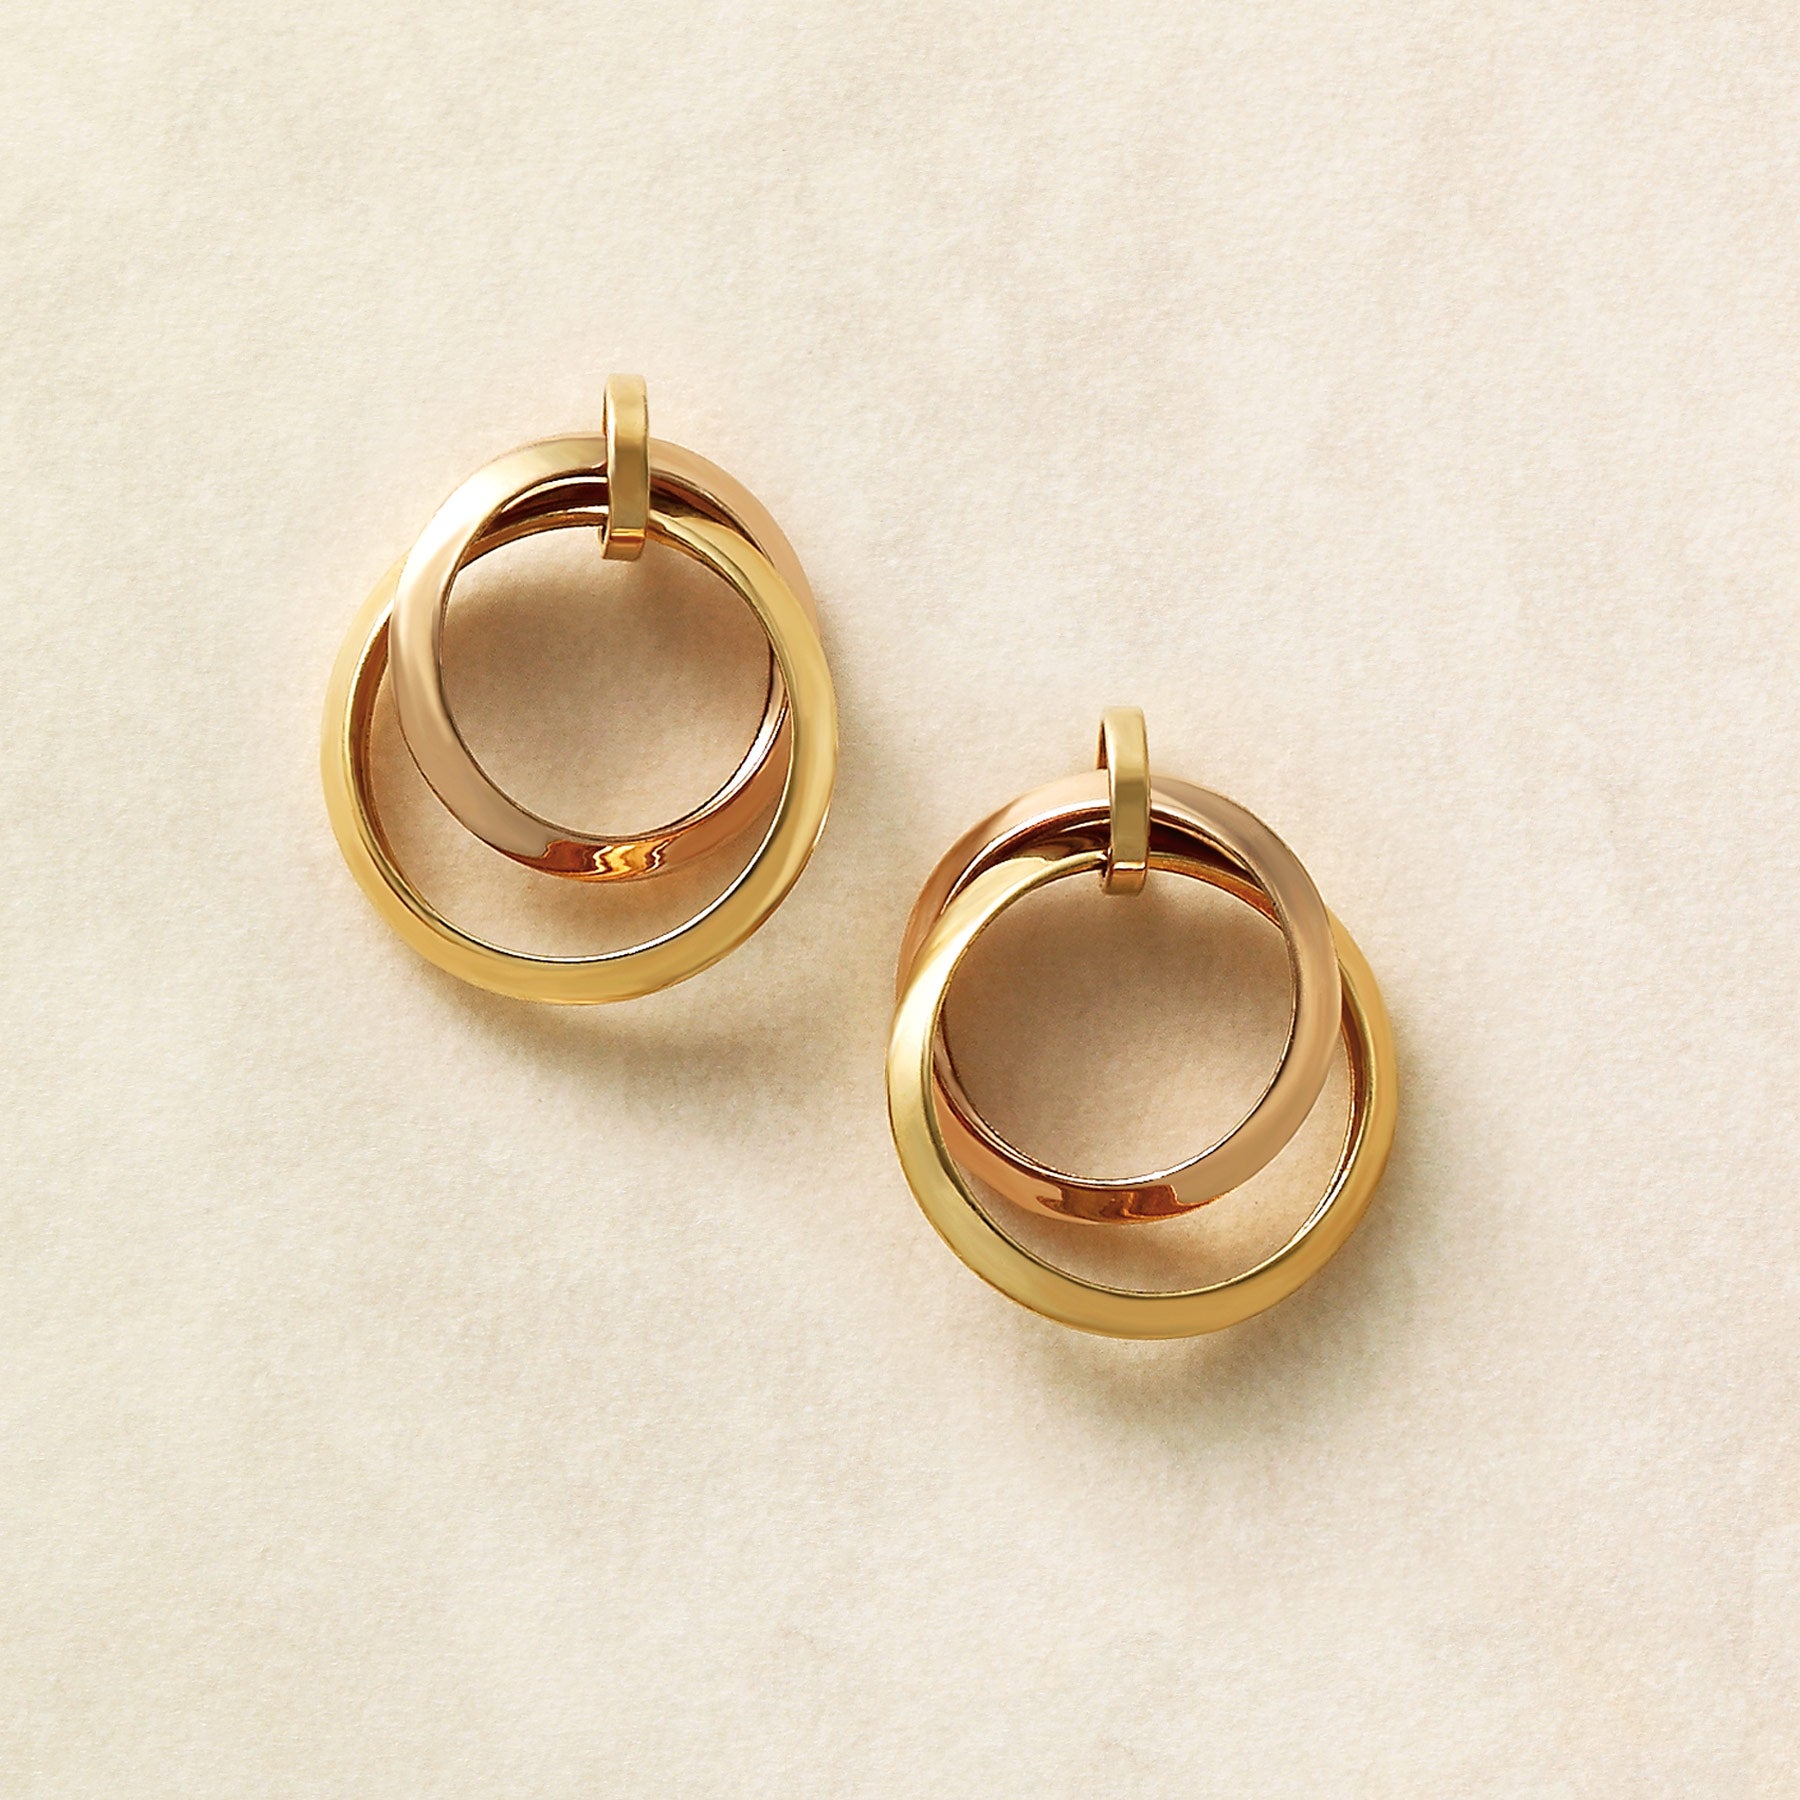 18K/10K Gold Tripartite Circle Earrings (Yellow Gold / Rose Gold) - Product Image